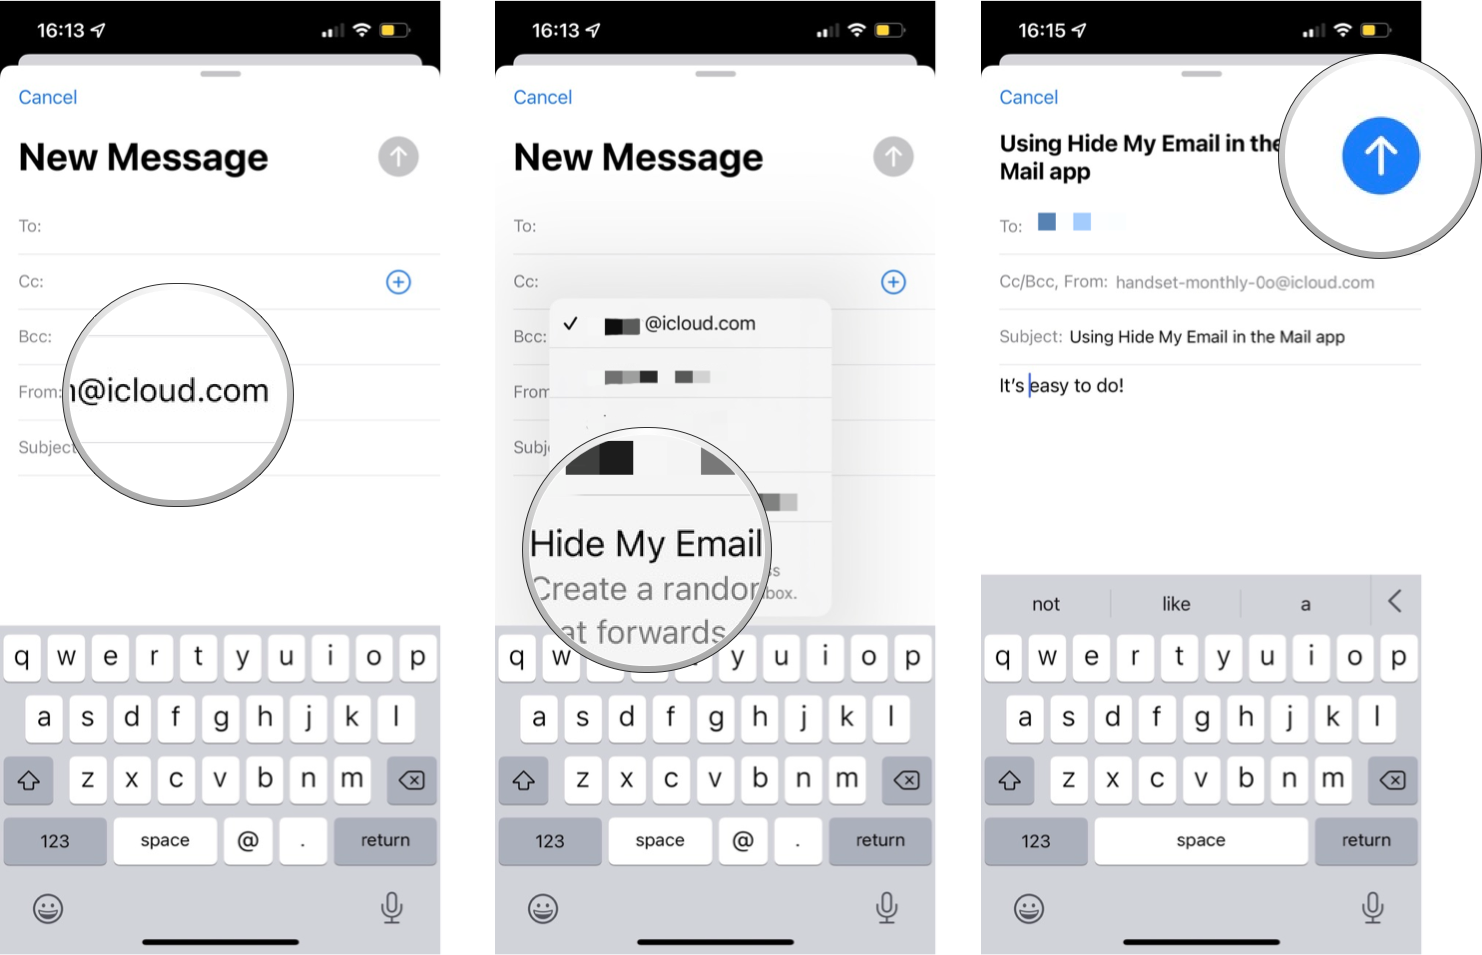 How to use Hide my email in the Mail app: Tap your email address, tap Hide my email, enter your email as usual.  Hide My Email will generate a random email address when you enter a recipient.  Press Send when ready